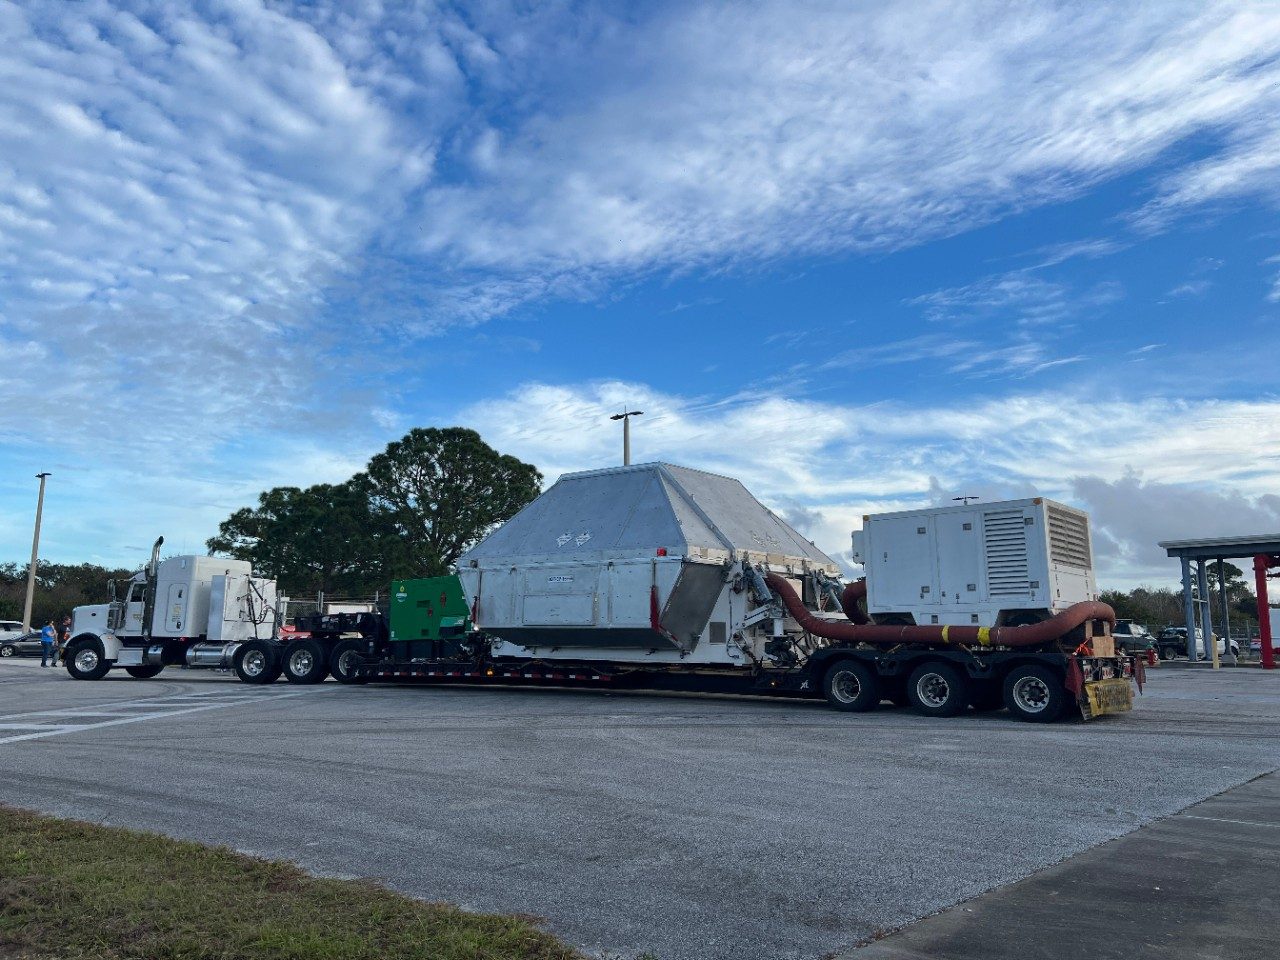 Orion safely stored during its transportation from California to Florida